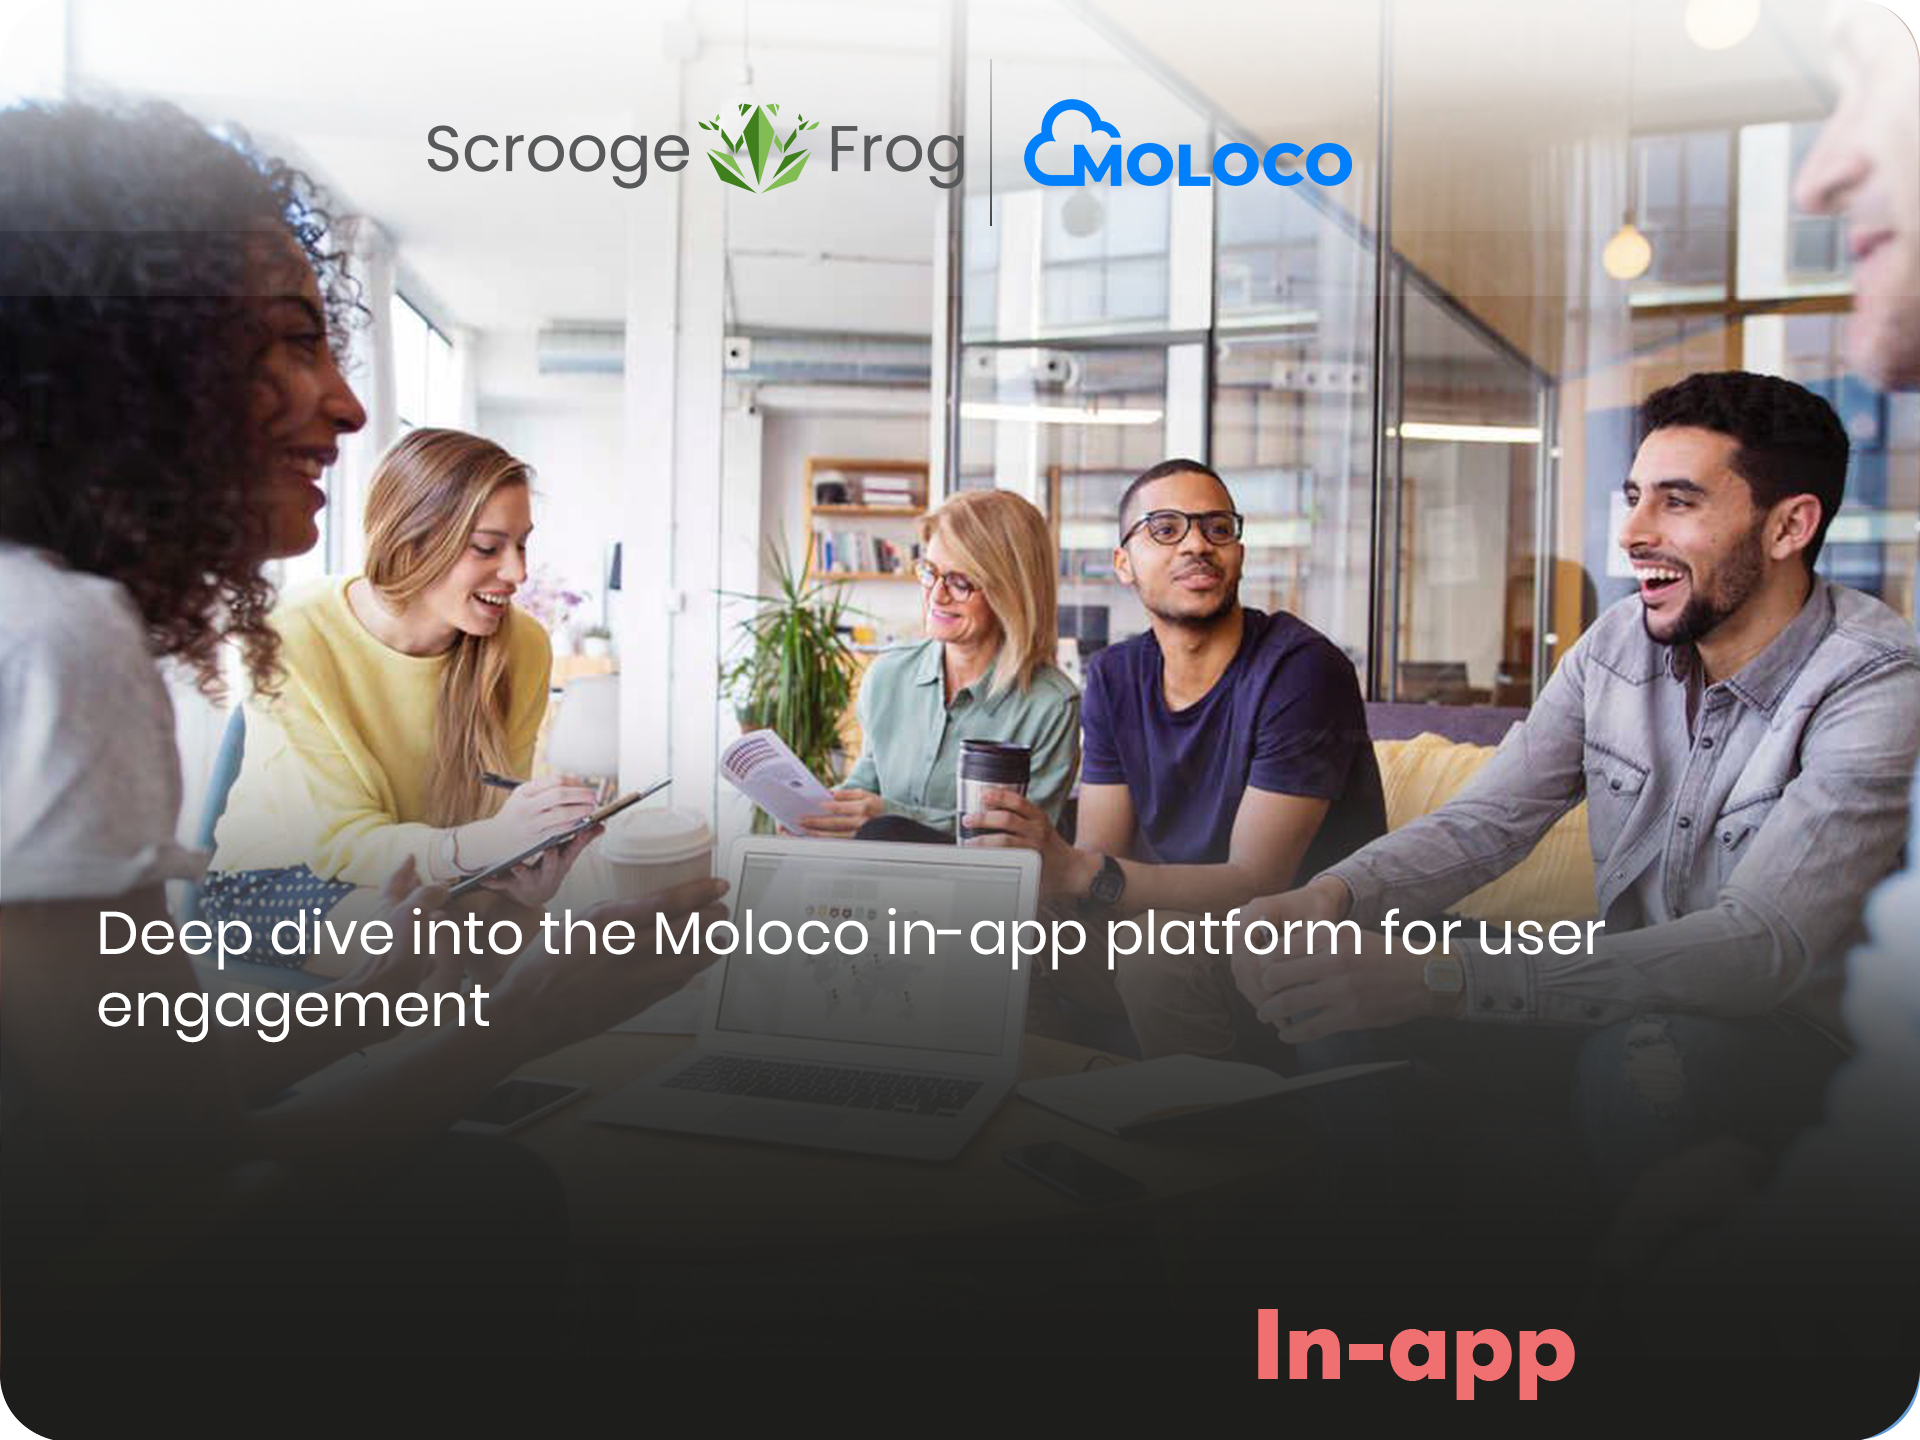 Deep dive into the Moloco in-app platform for user engagement